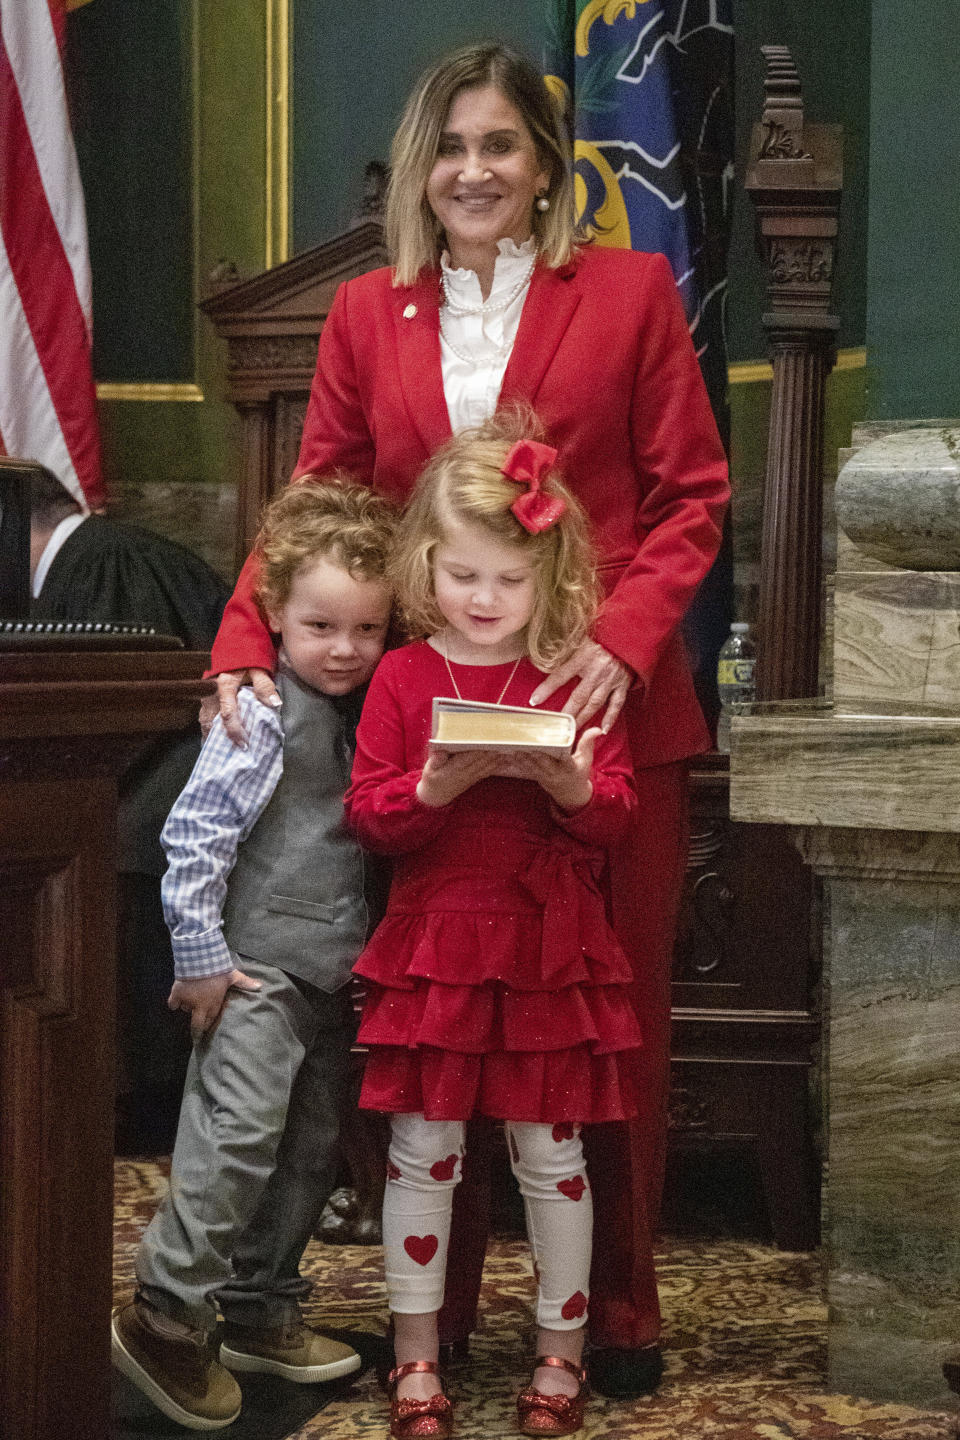 Sen. Kim Ward, poses with her grandchildren Thomas Daniel Ward, 3, and his sister Josie Jane Ward, 4, holding the bible as she took the oath of office as President Pro Tempore of the Pennsylvania Senate, Tuesday, Jan. 3, 2023, in Harrisburg, Pa. (Mark Pynes/The Patriot-News via AP)